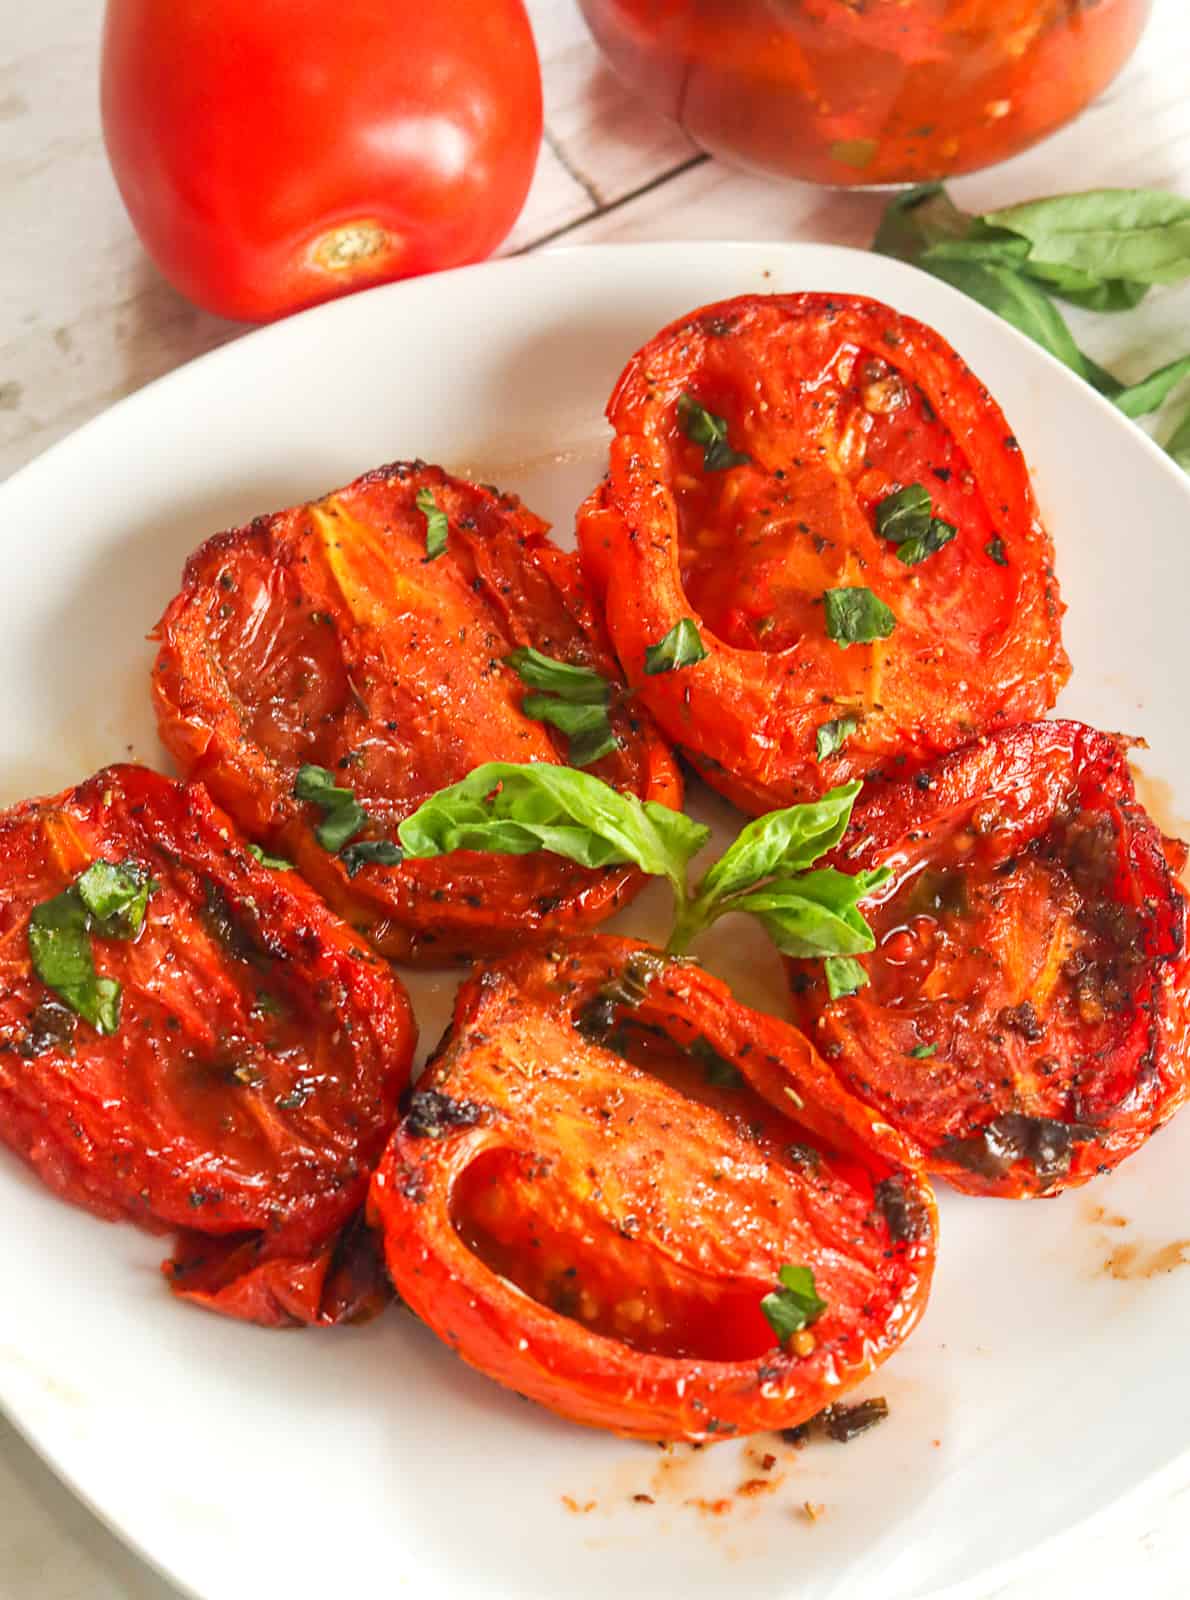 Light up the roasted tomatoes and multiply your recipes